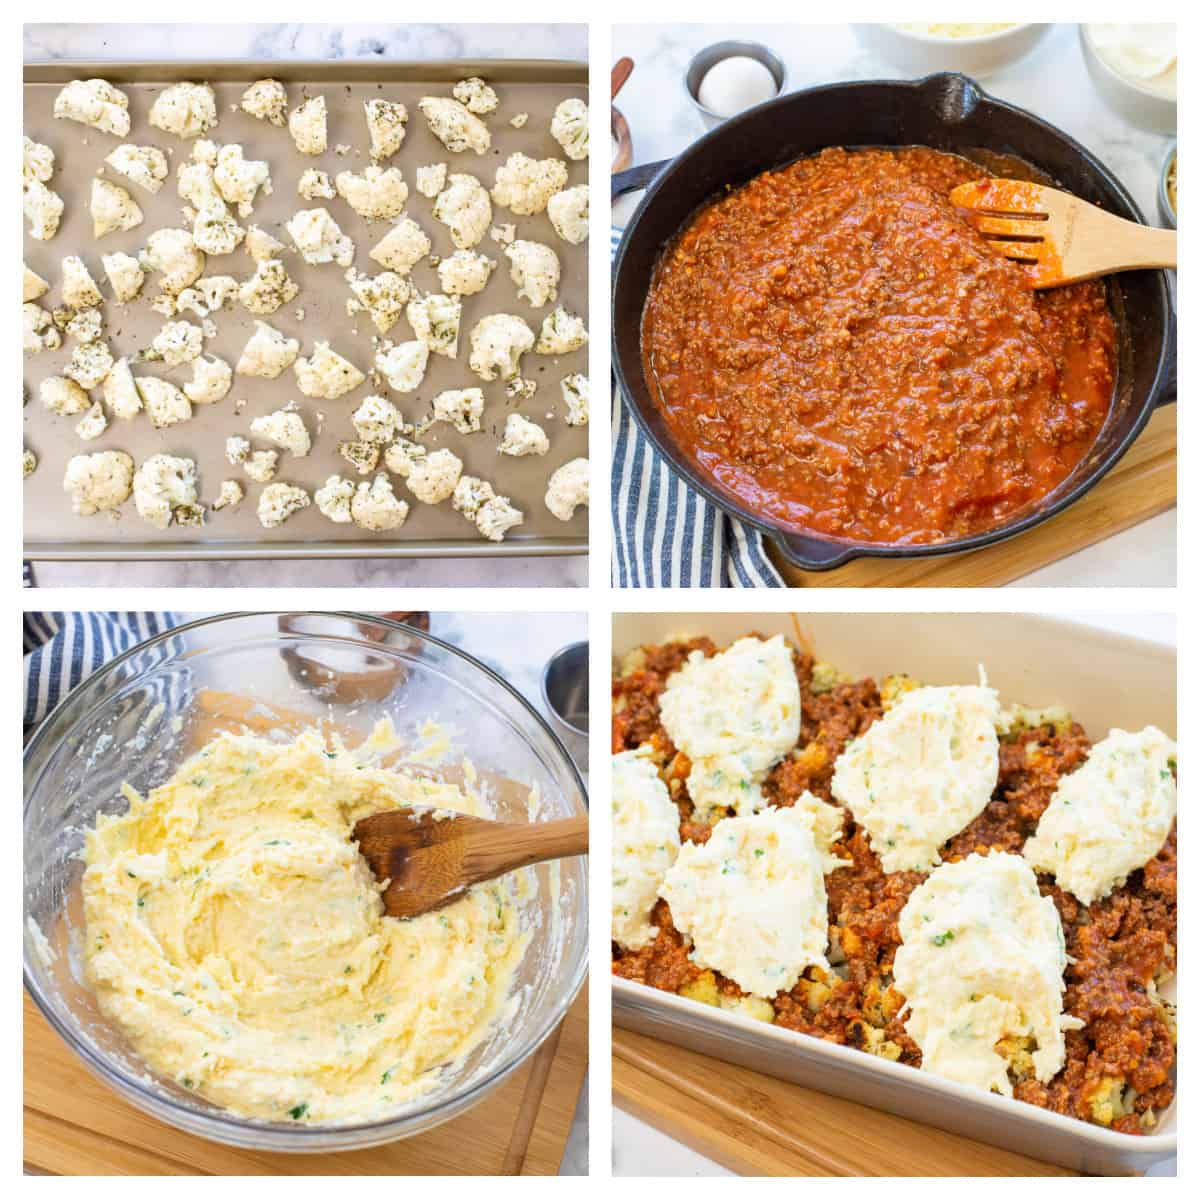 Collage showing how to make keto baked ziti.